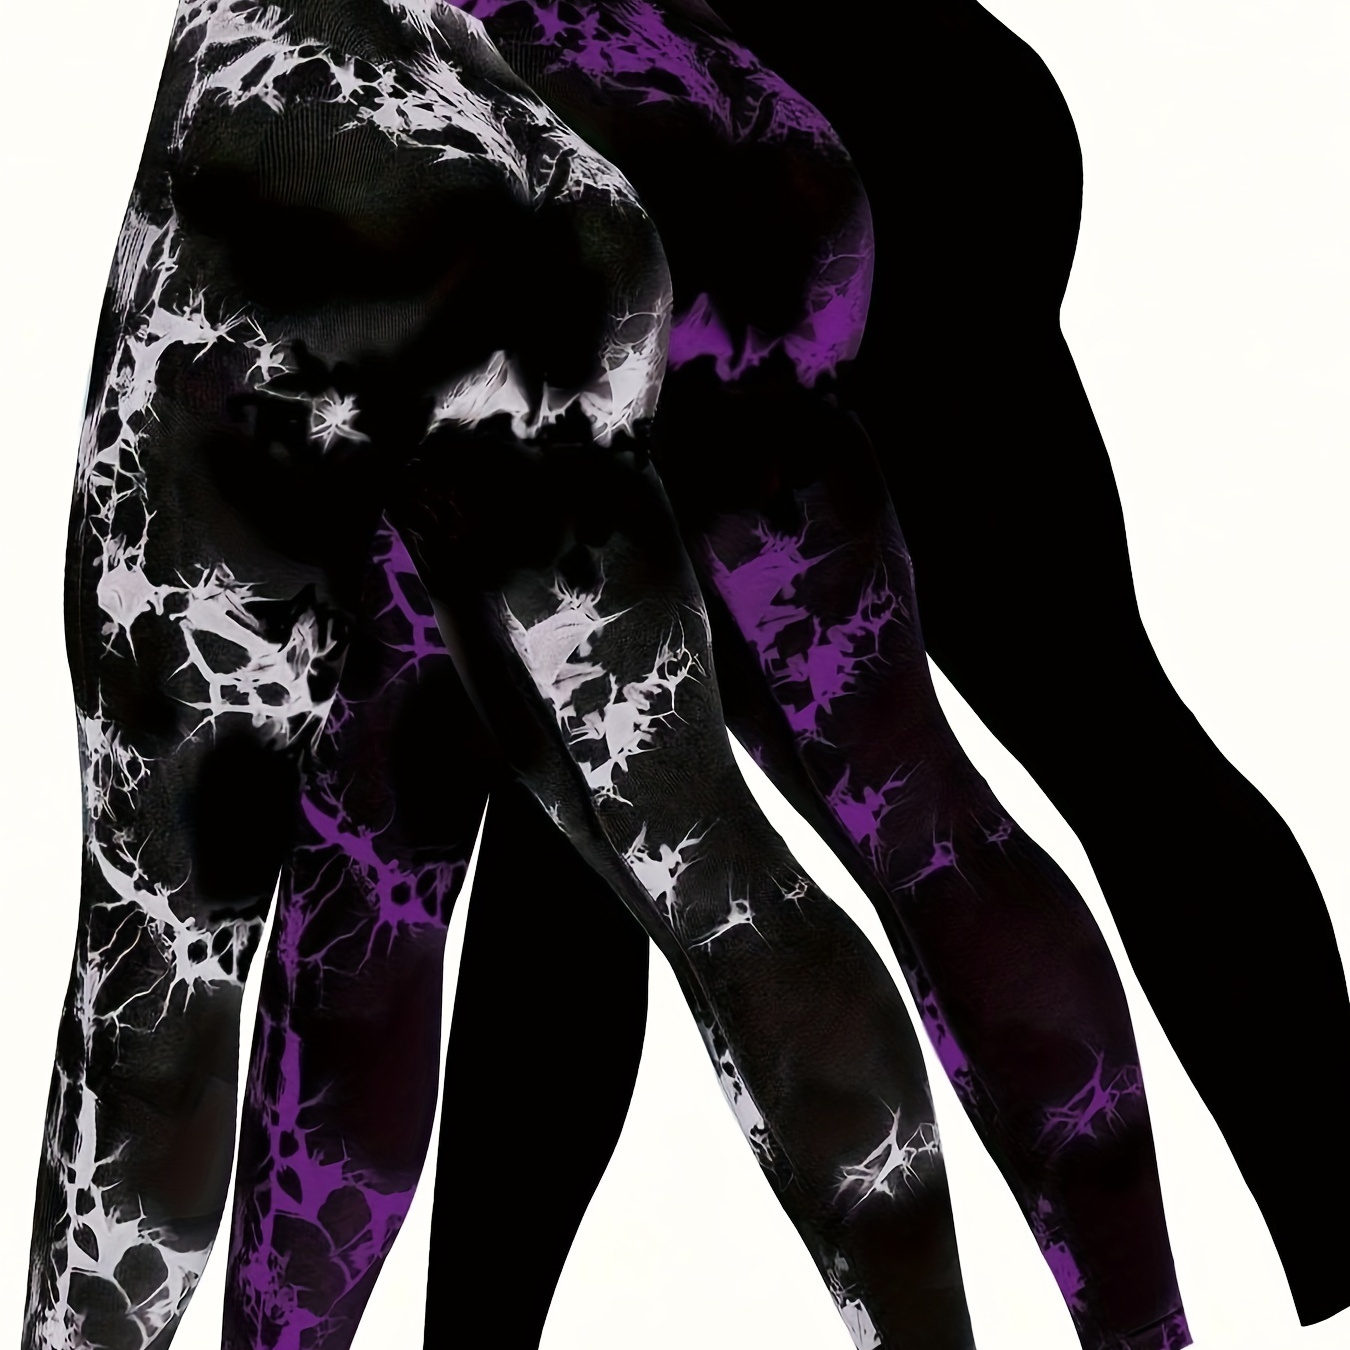 

3-pack High Waisted Leggings, Tie-dye Yoga Pants, Tummy Control Compression Fit, Slimming Workout Trousers